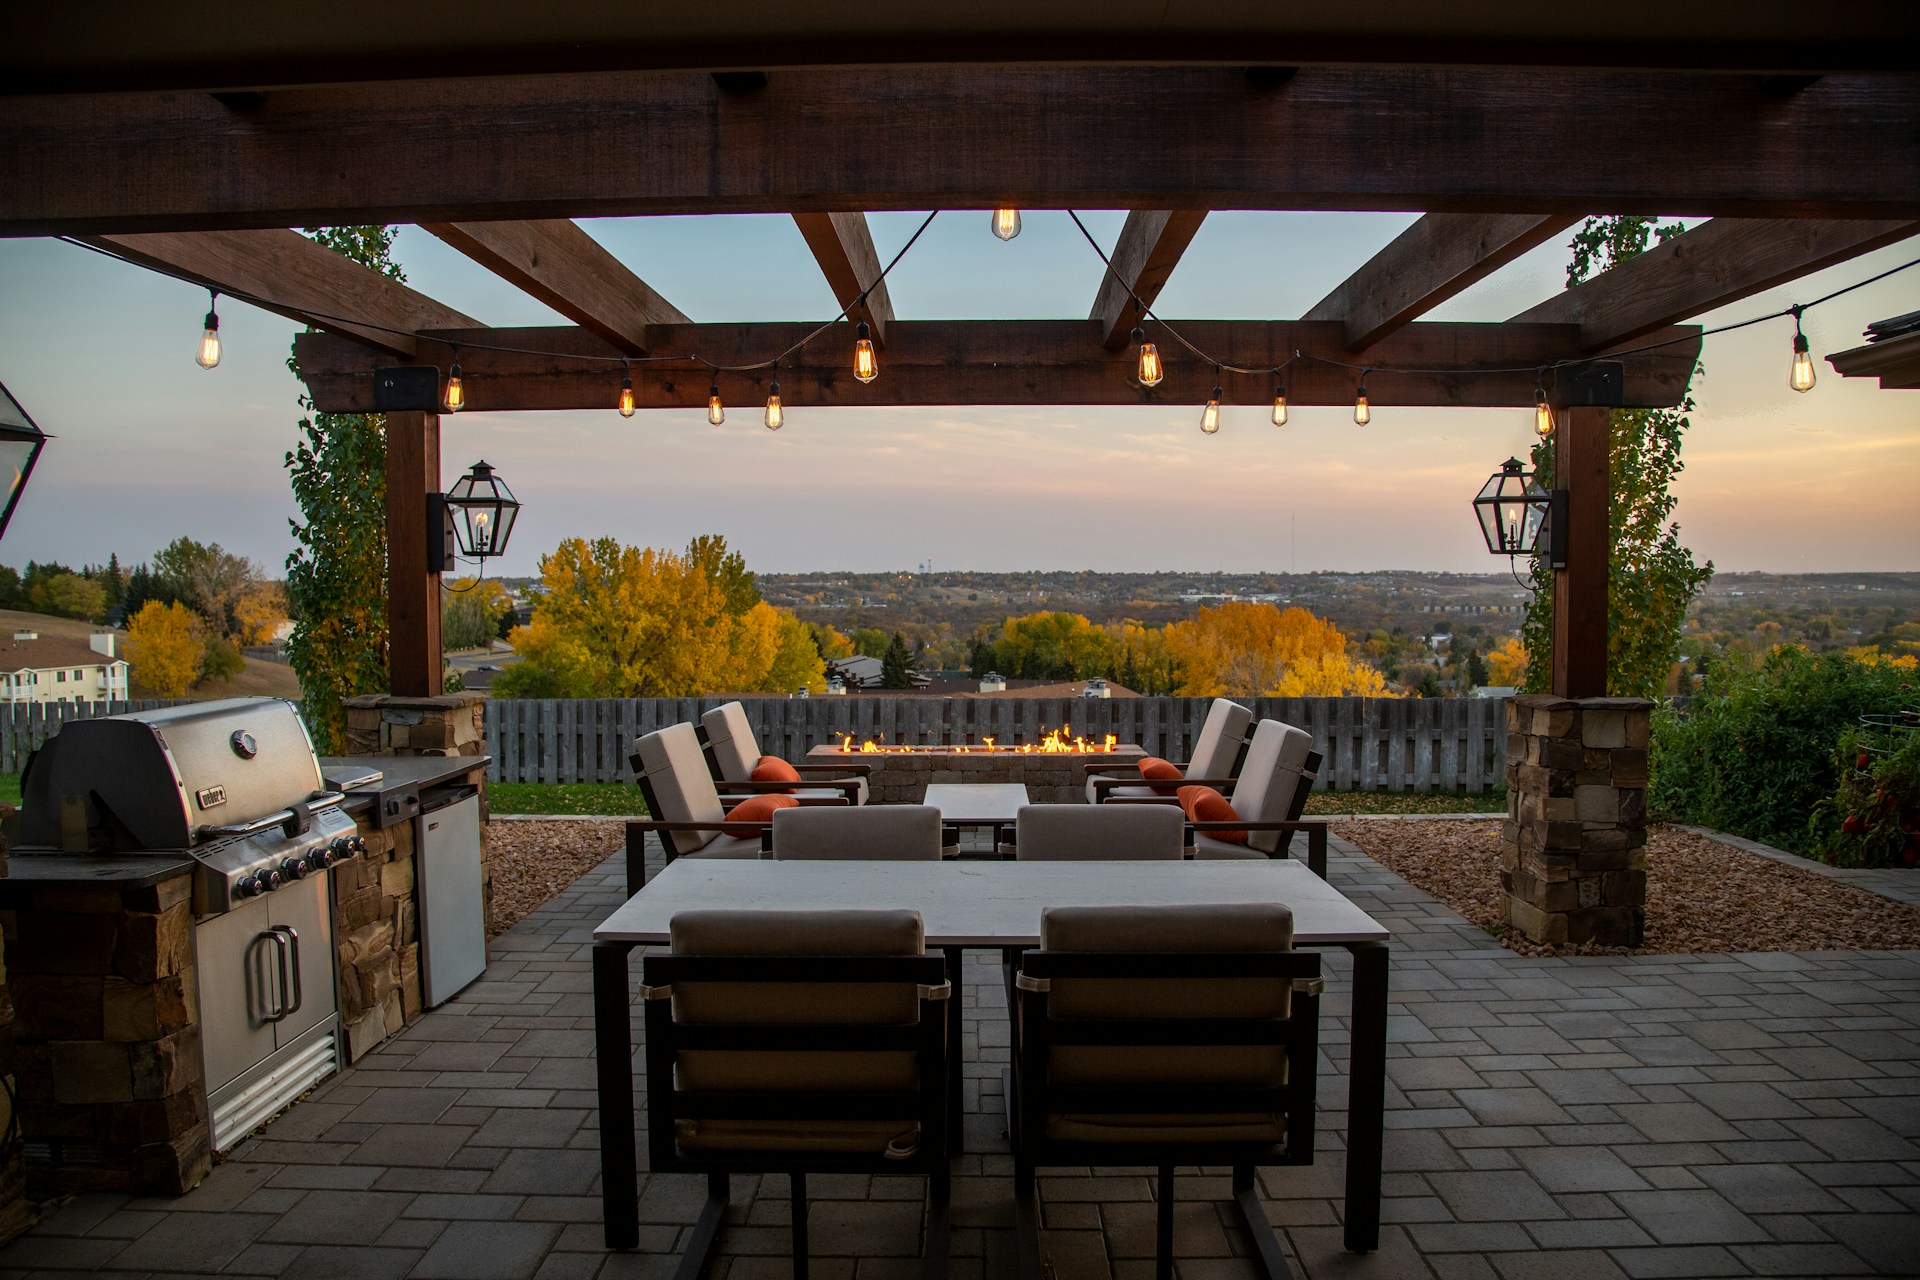 Large patio with bbq and furniture. Image by Unsplash